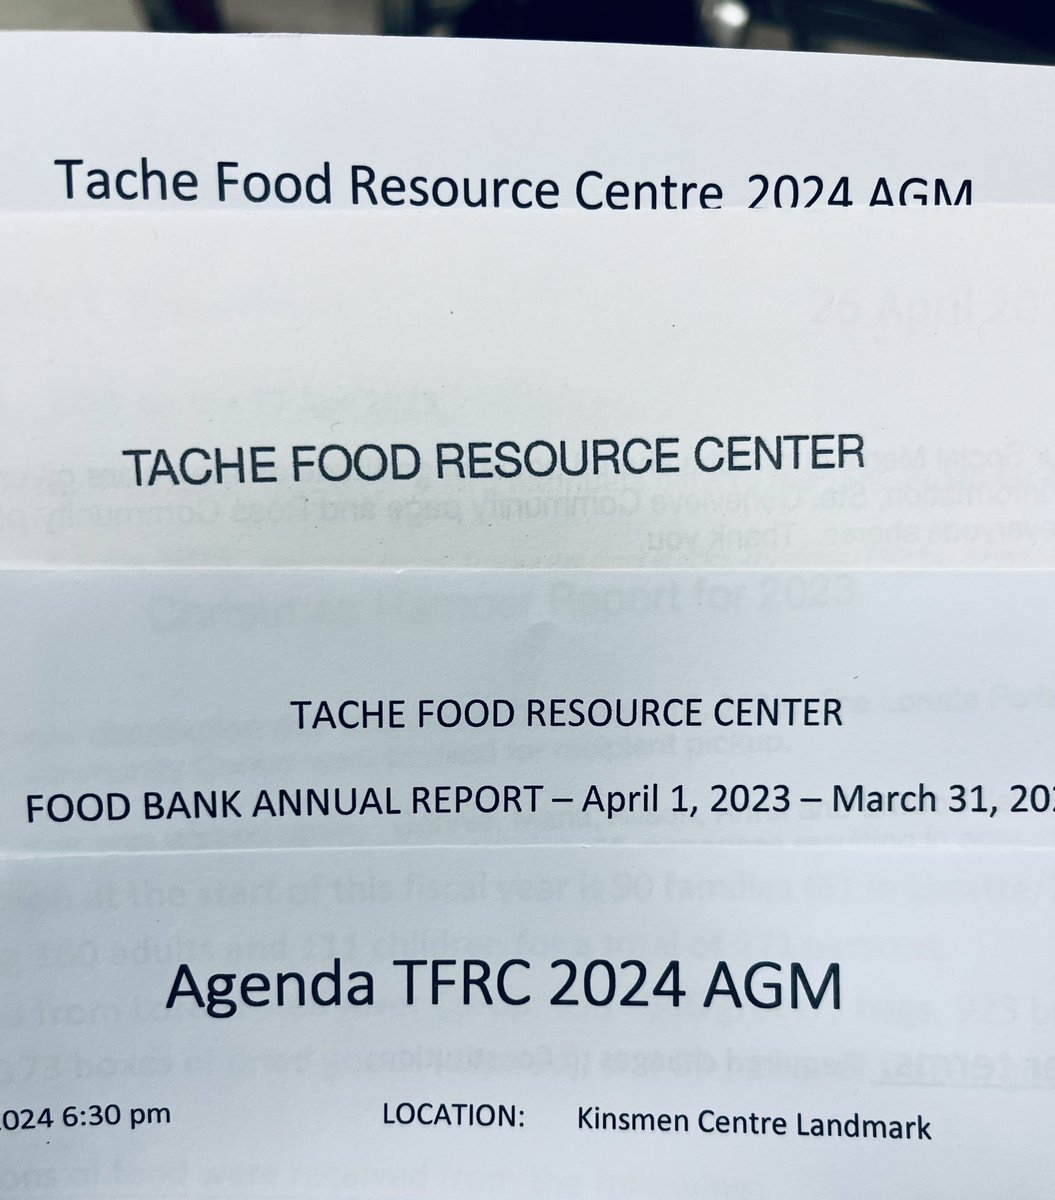 Happy to serve as a new Board Member of the Taché Food Resource Centre. So many folks in our community need these services and I’m proud of our community members that have volunteered their time and money to help out.